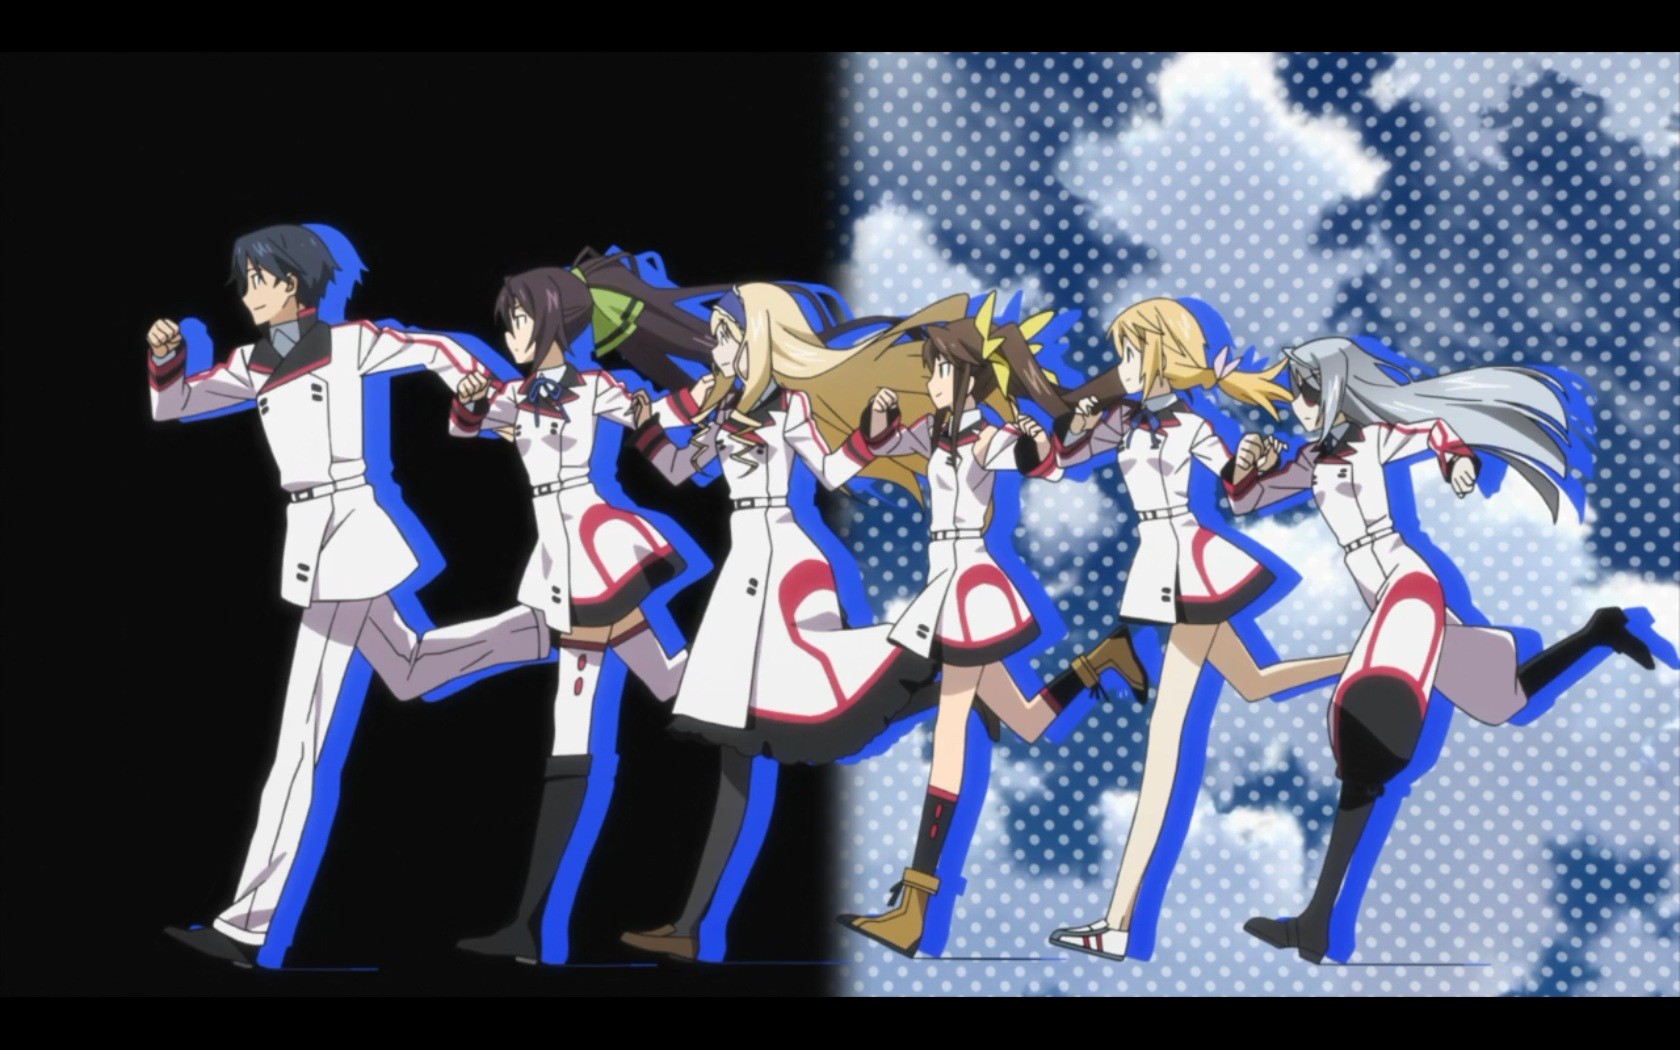 HD Wallpaper Infinite Stratos Of Picture X